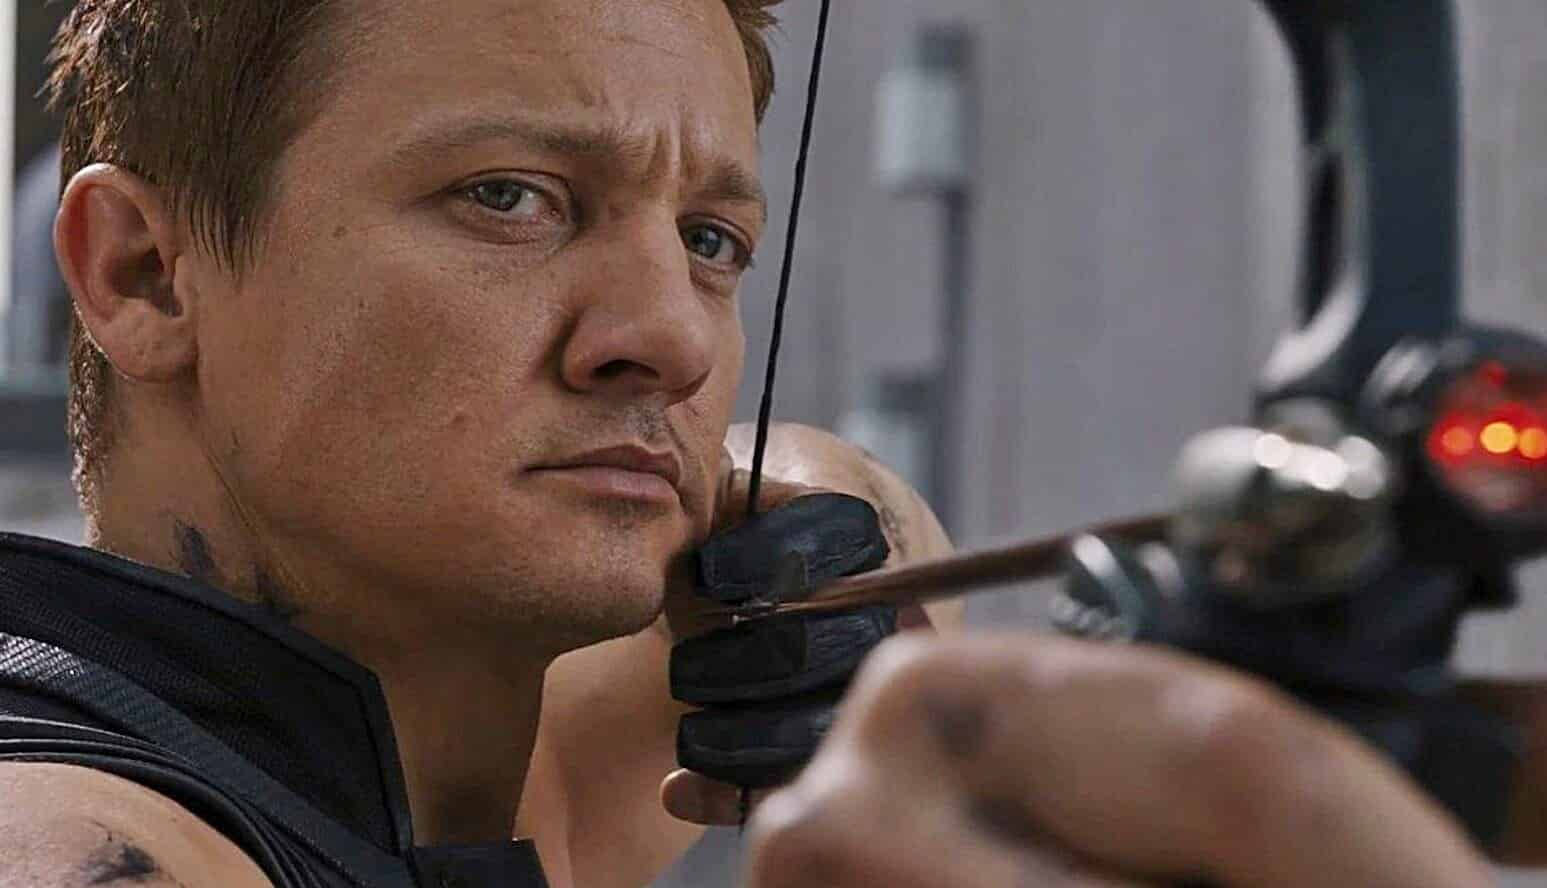 Jeremy Renner Aiming With A Bow